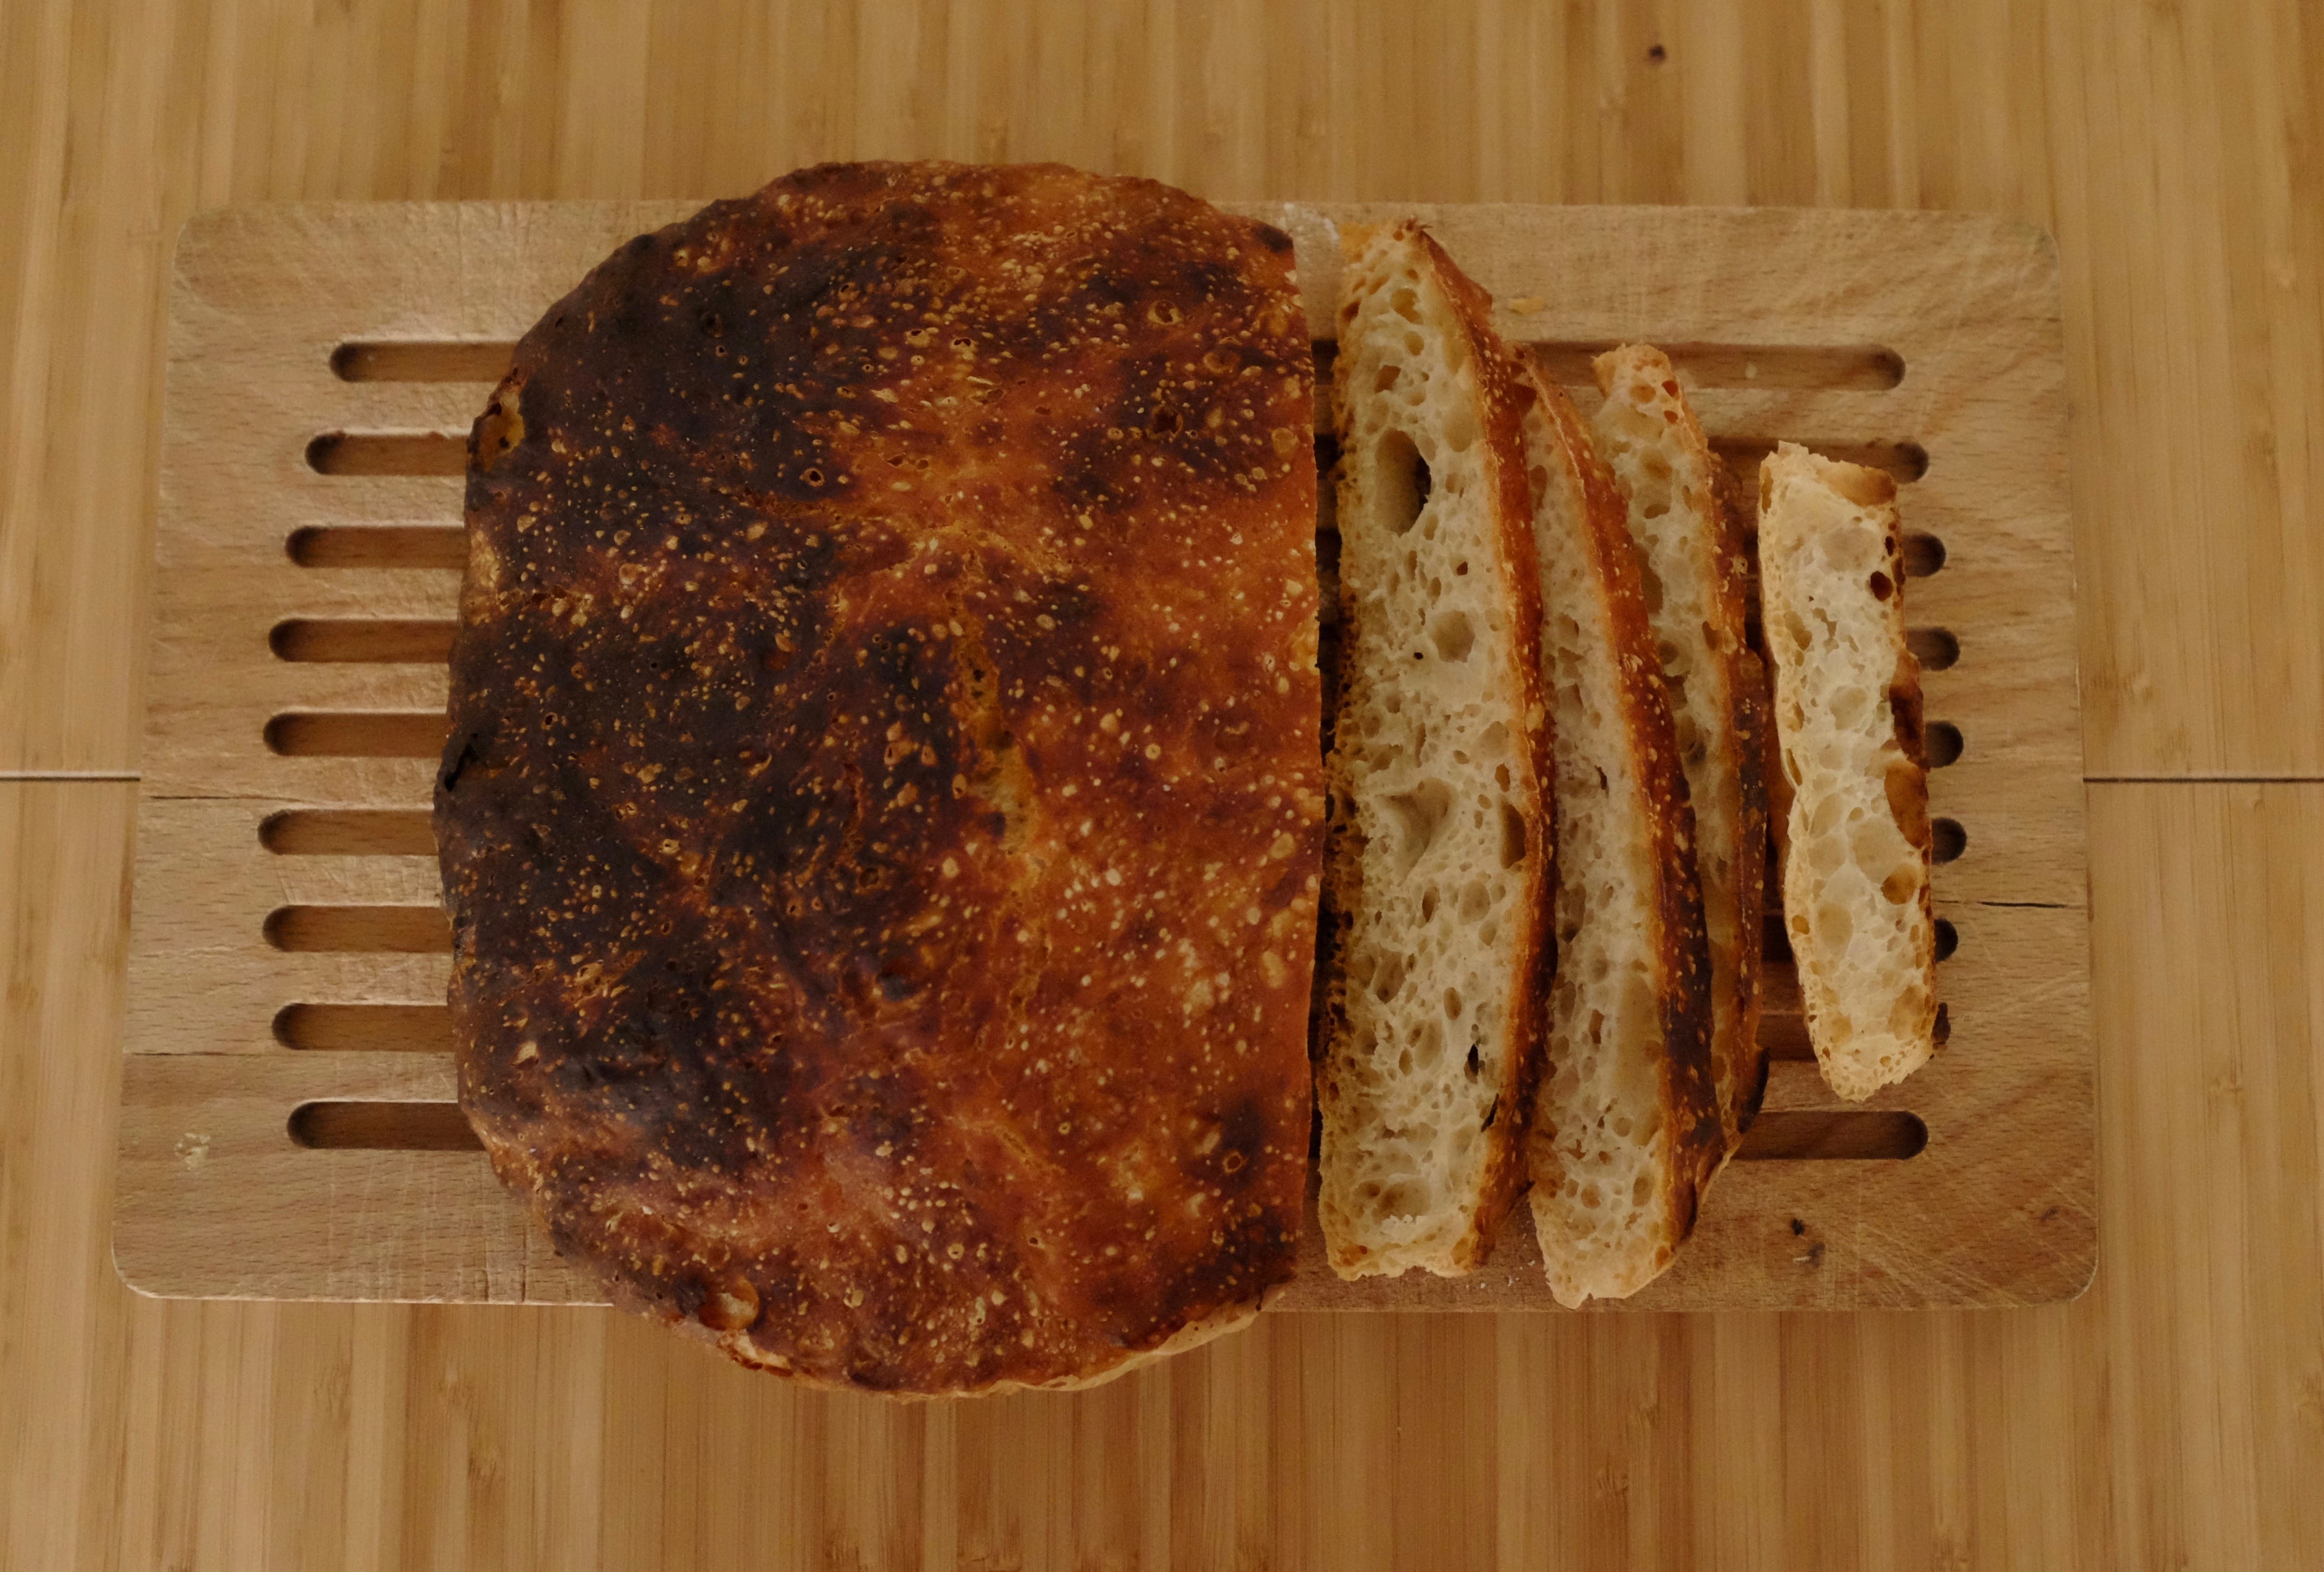 An image of a bread called “No-Knead Bread No. 2”